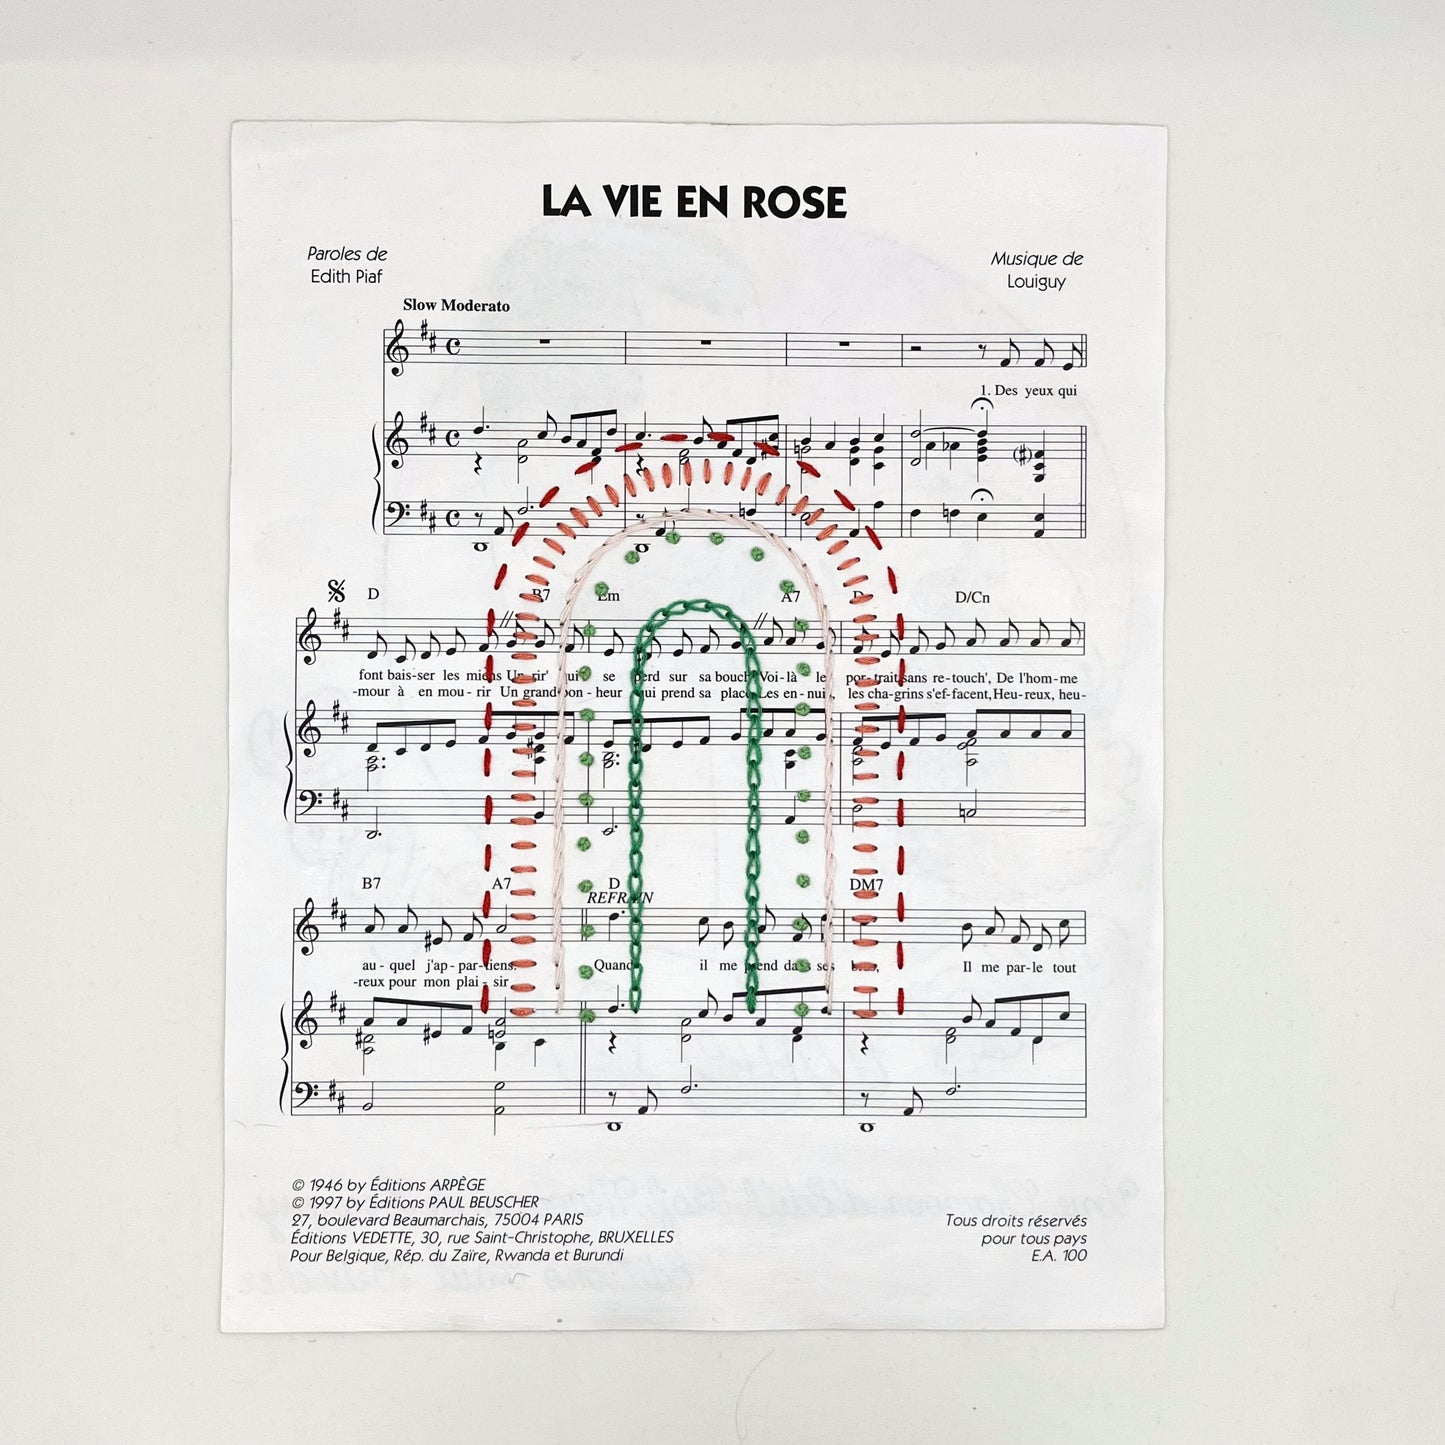 Wall Hanging- "La Vie en rose" Sheet Music with Hand Embroidered Rainbow